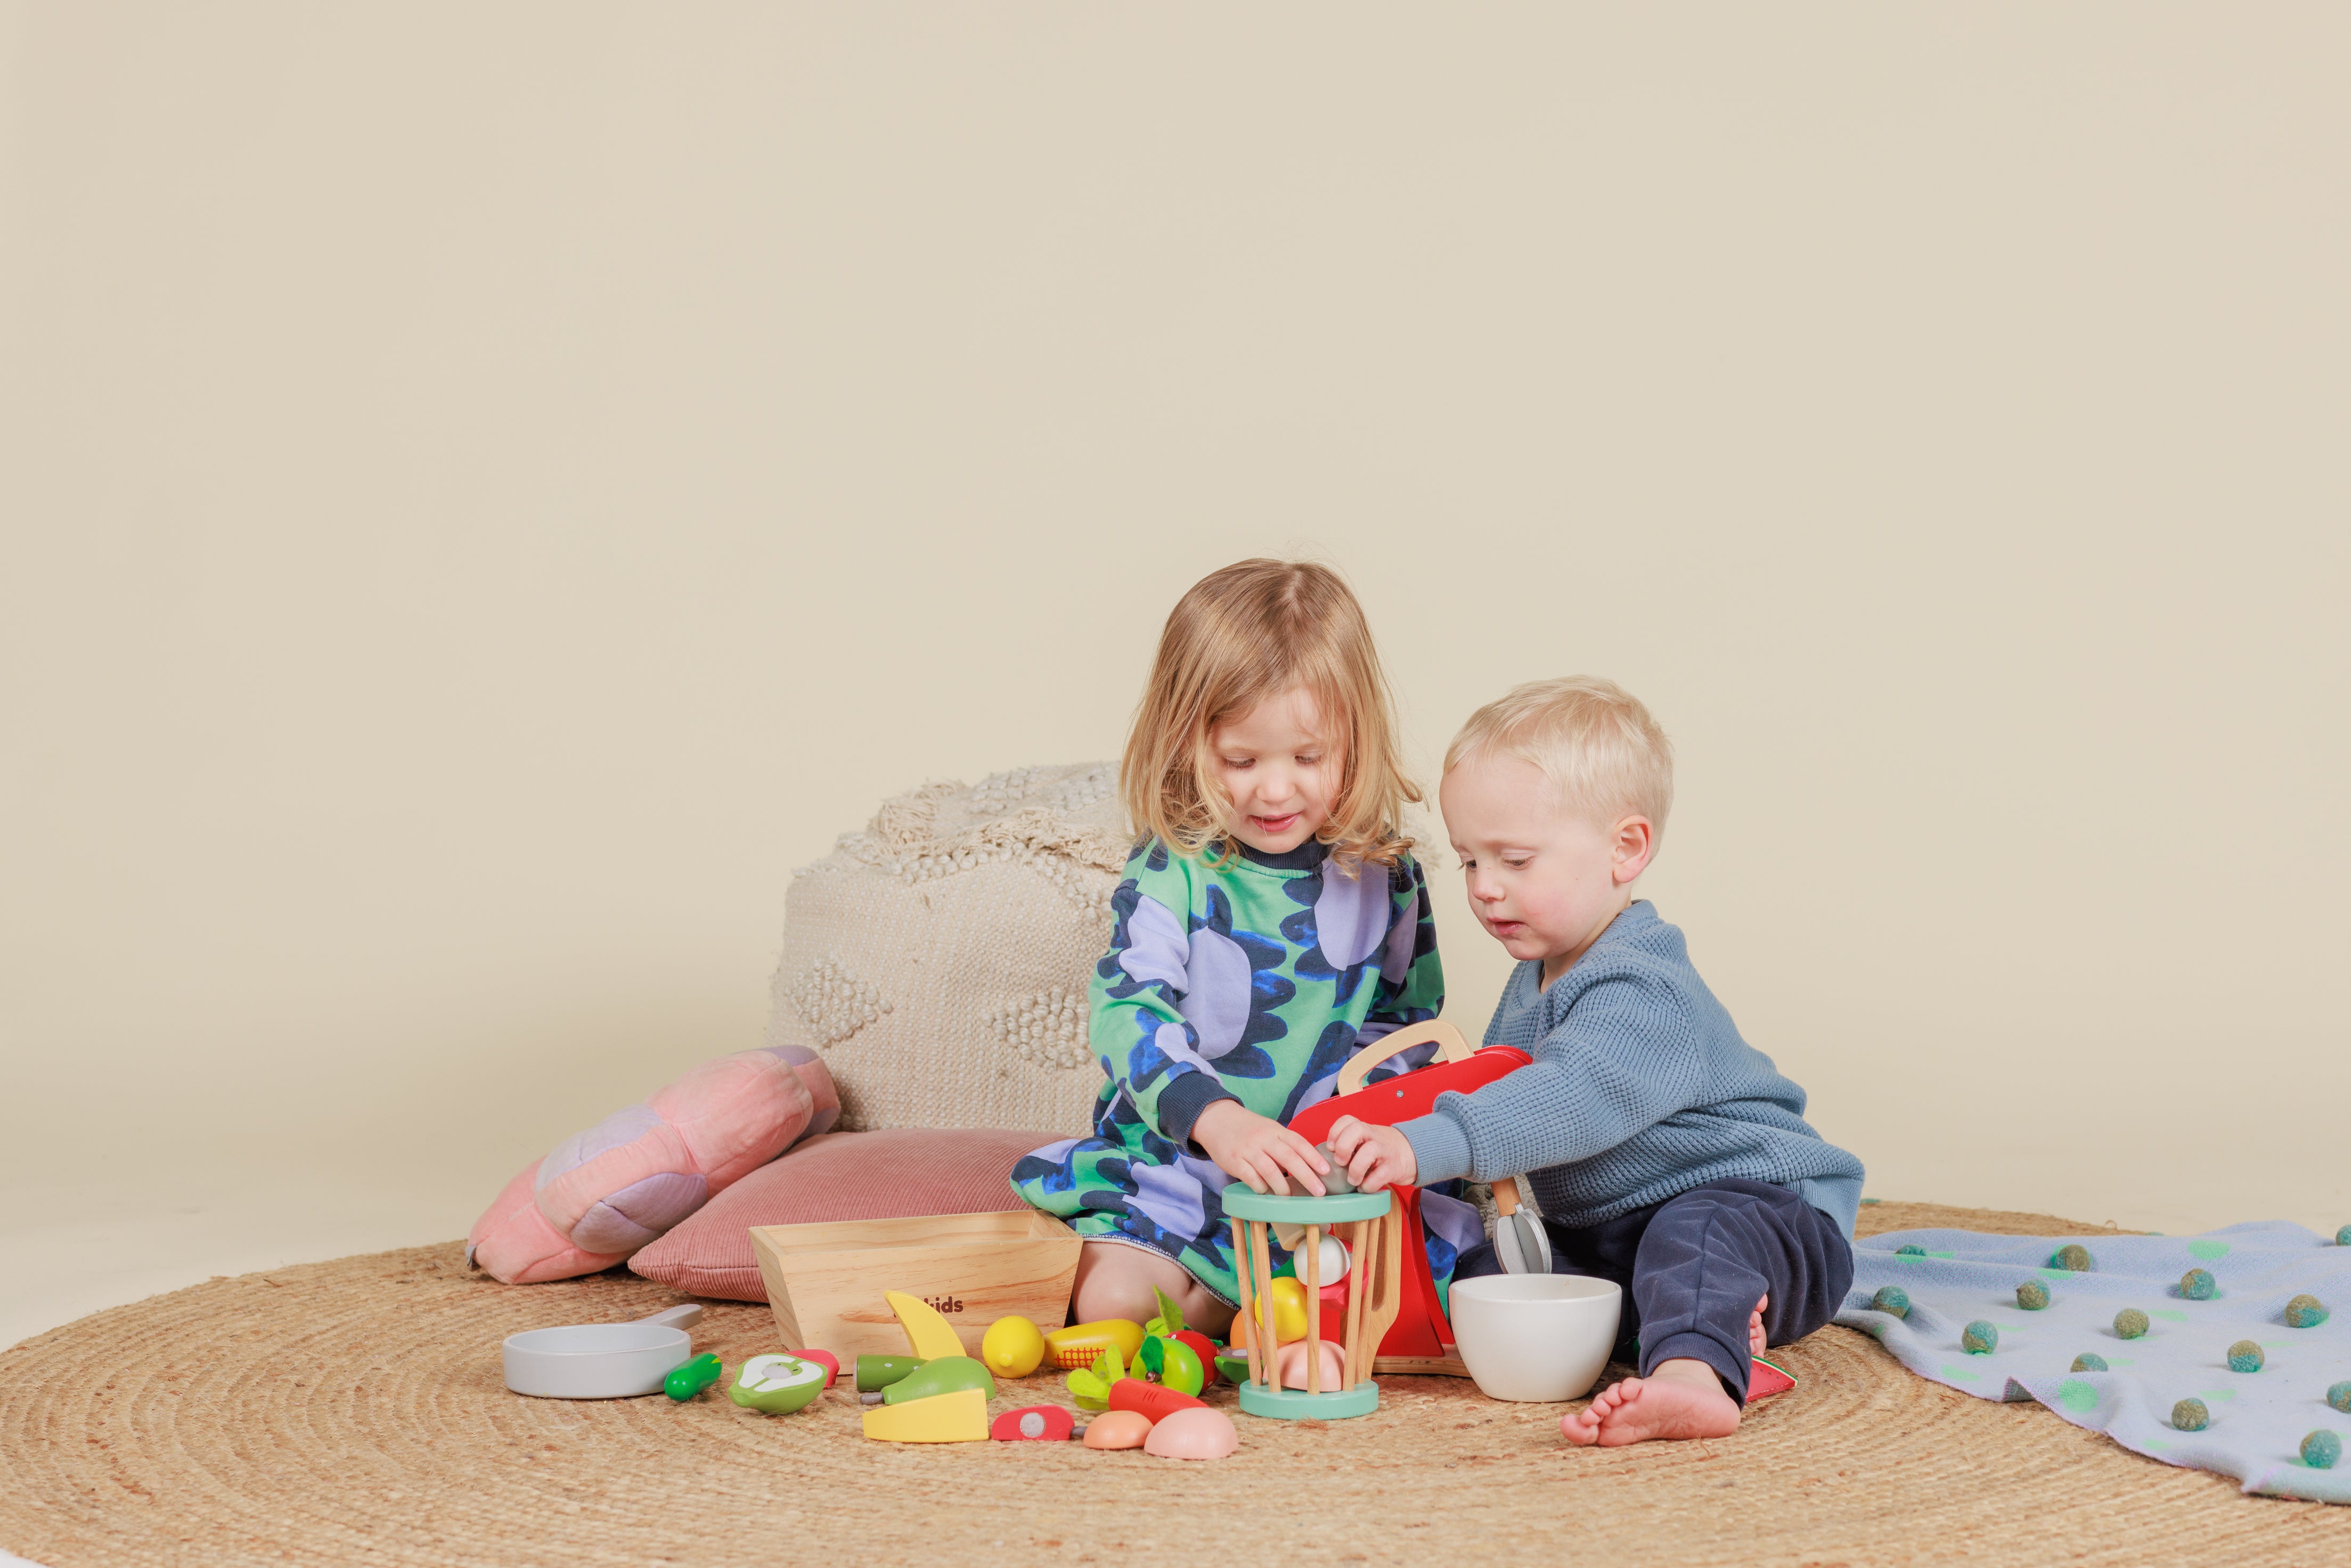 Photo of toddlers - Audrey and Alfie playing together